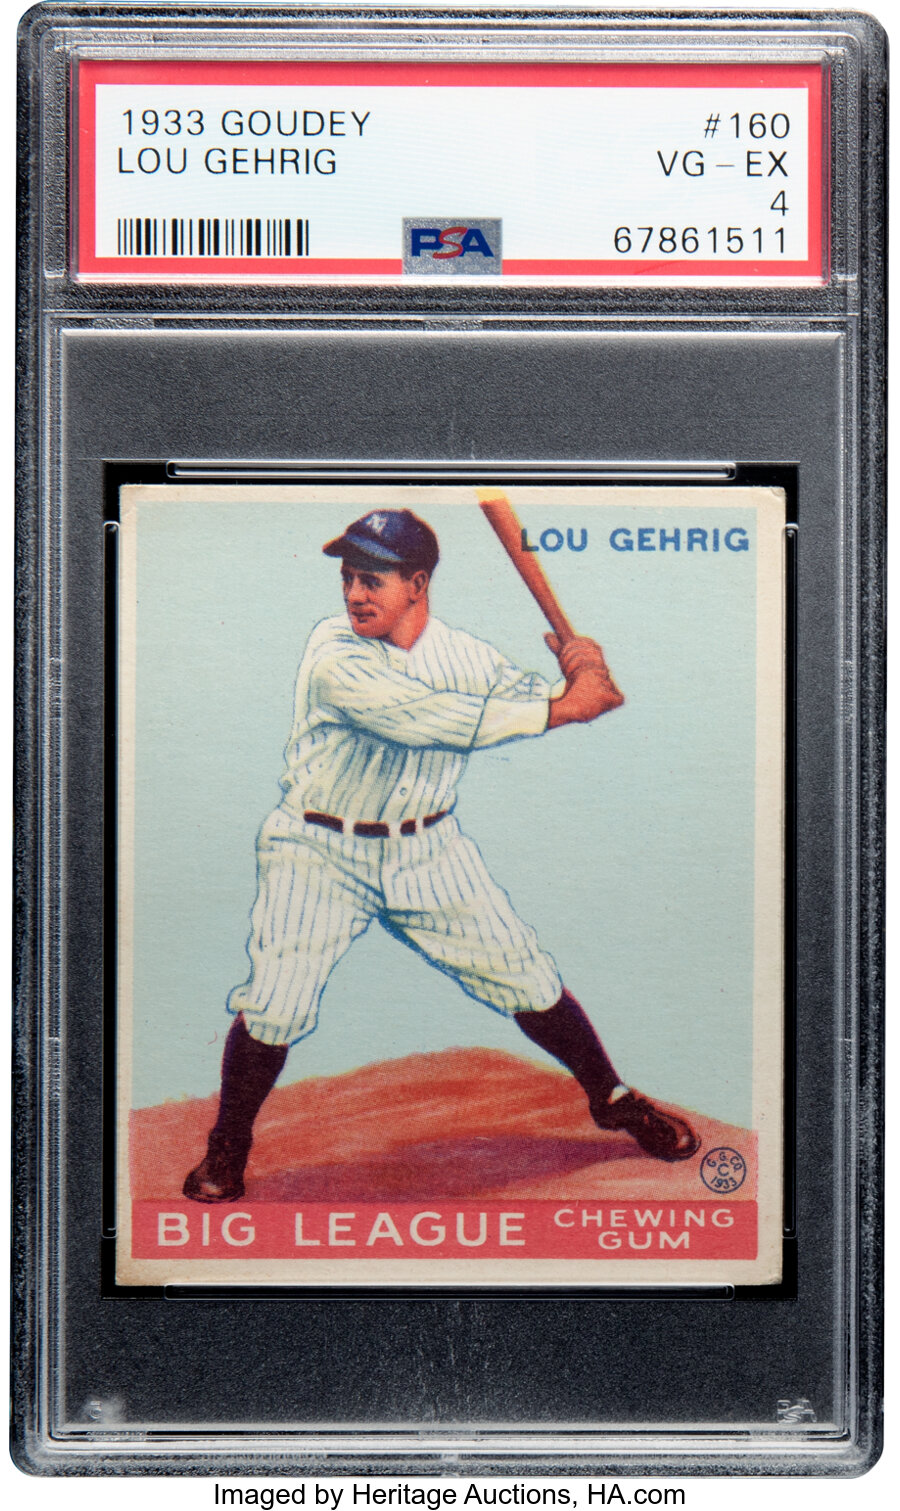 1933 Goudey Lou Gehrig Rookie #160 PSA VG-EX 4 - New to the Hobby!